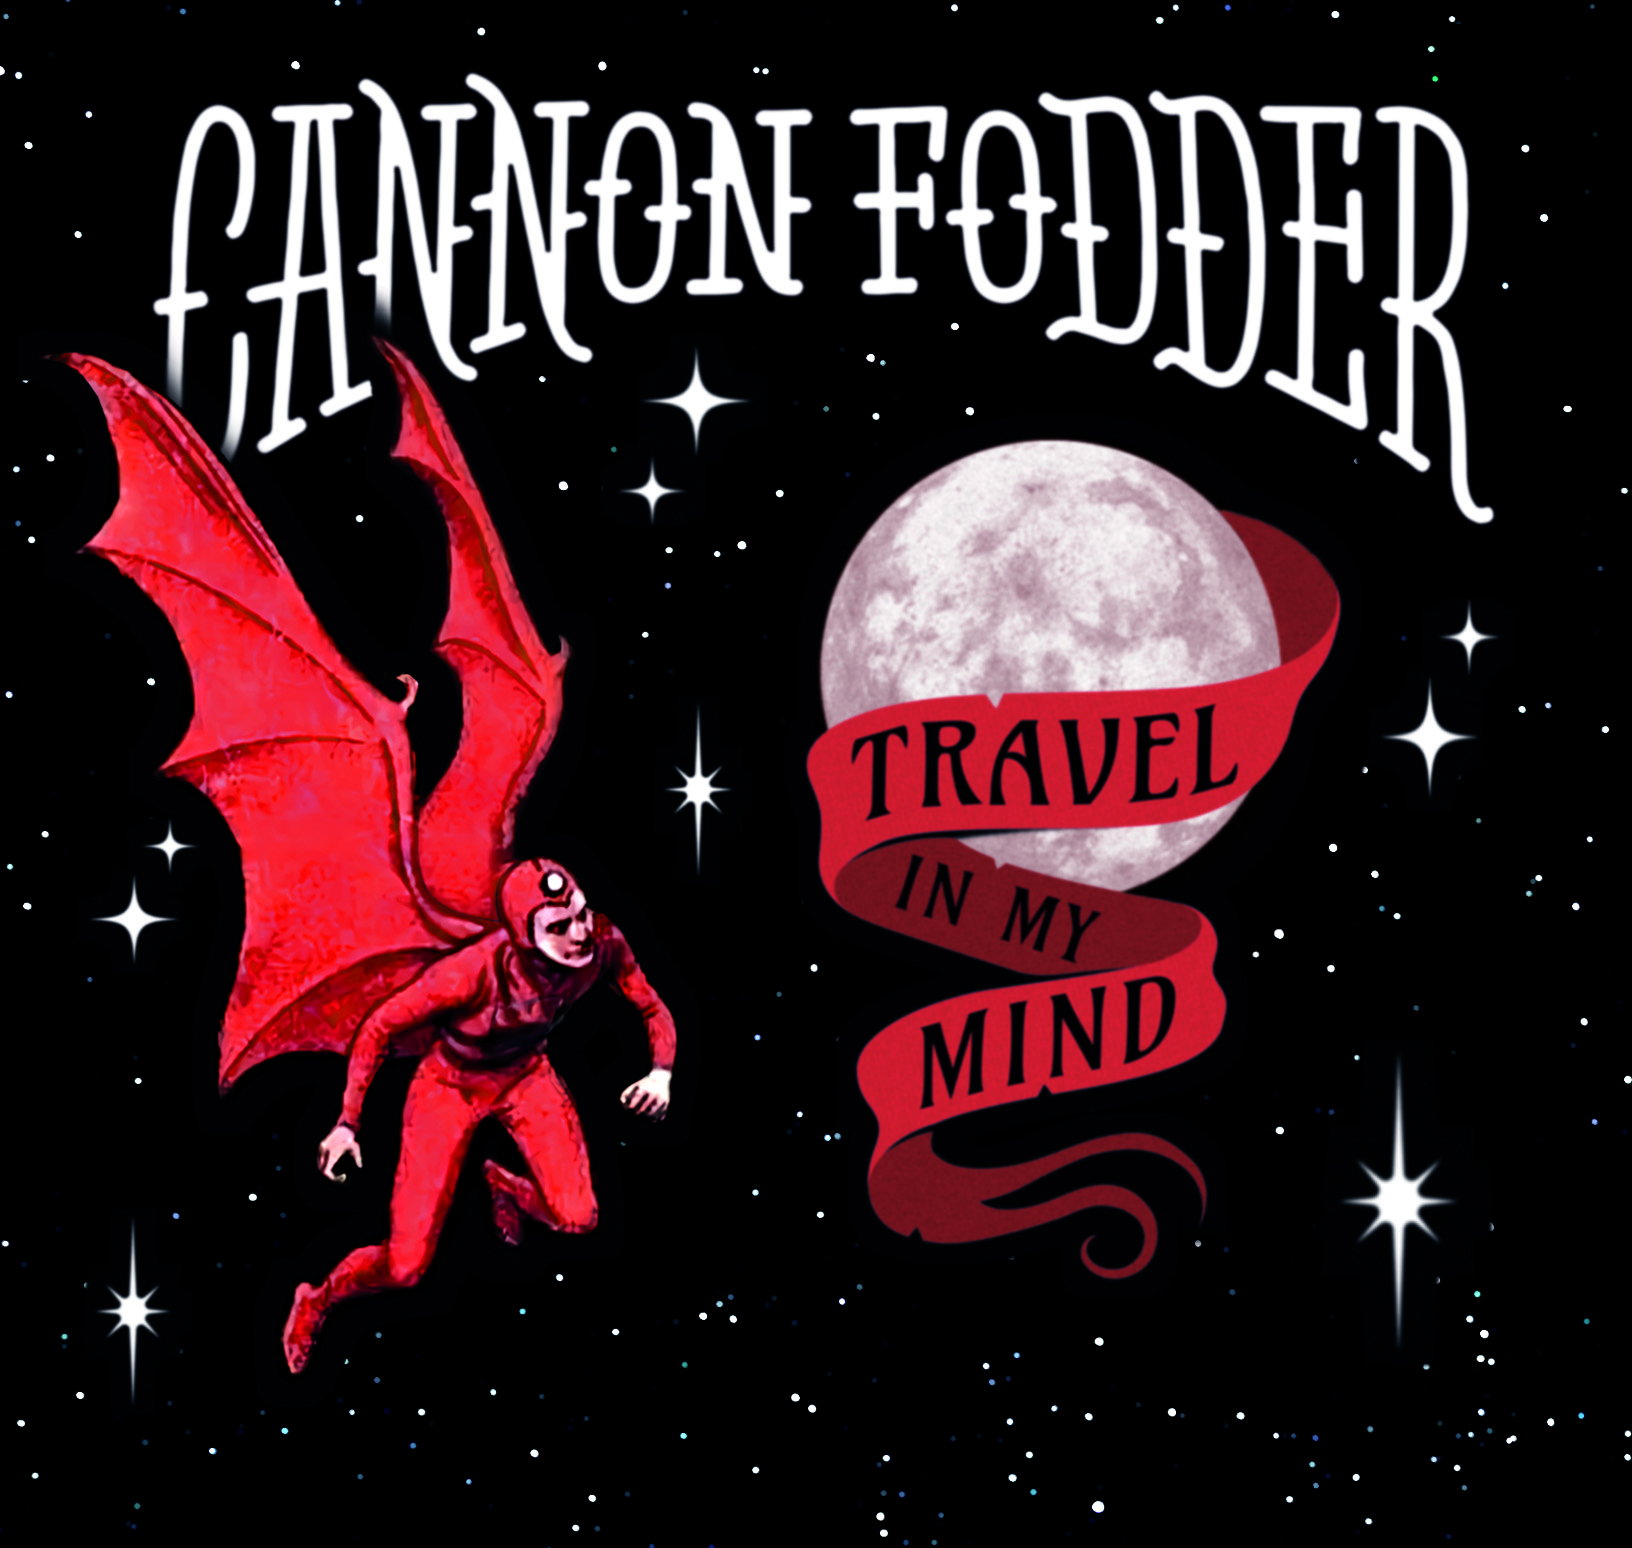 Cannon Fodder, Travel in My Mind, digipack CD album, Beast Records